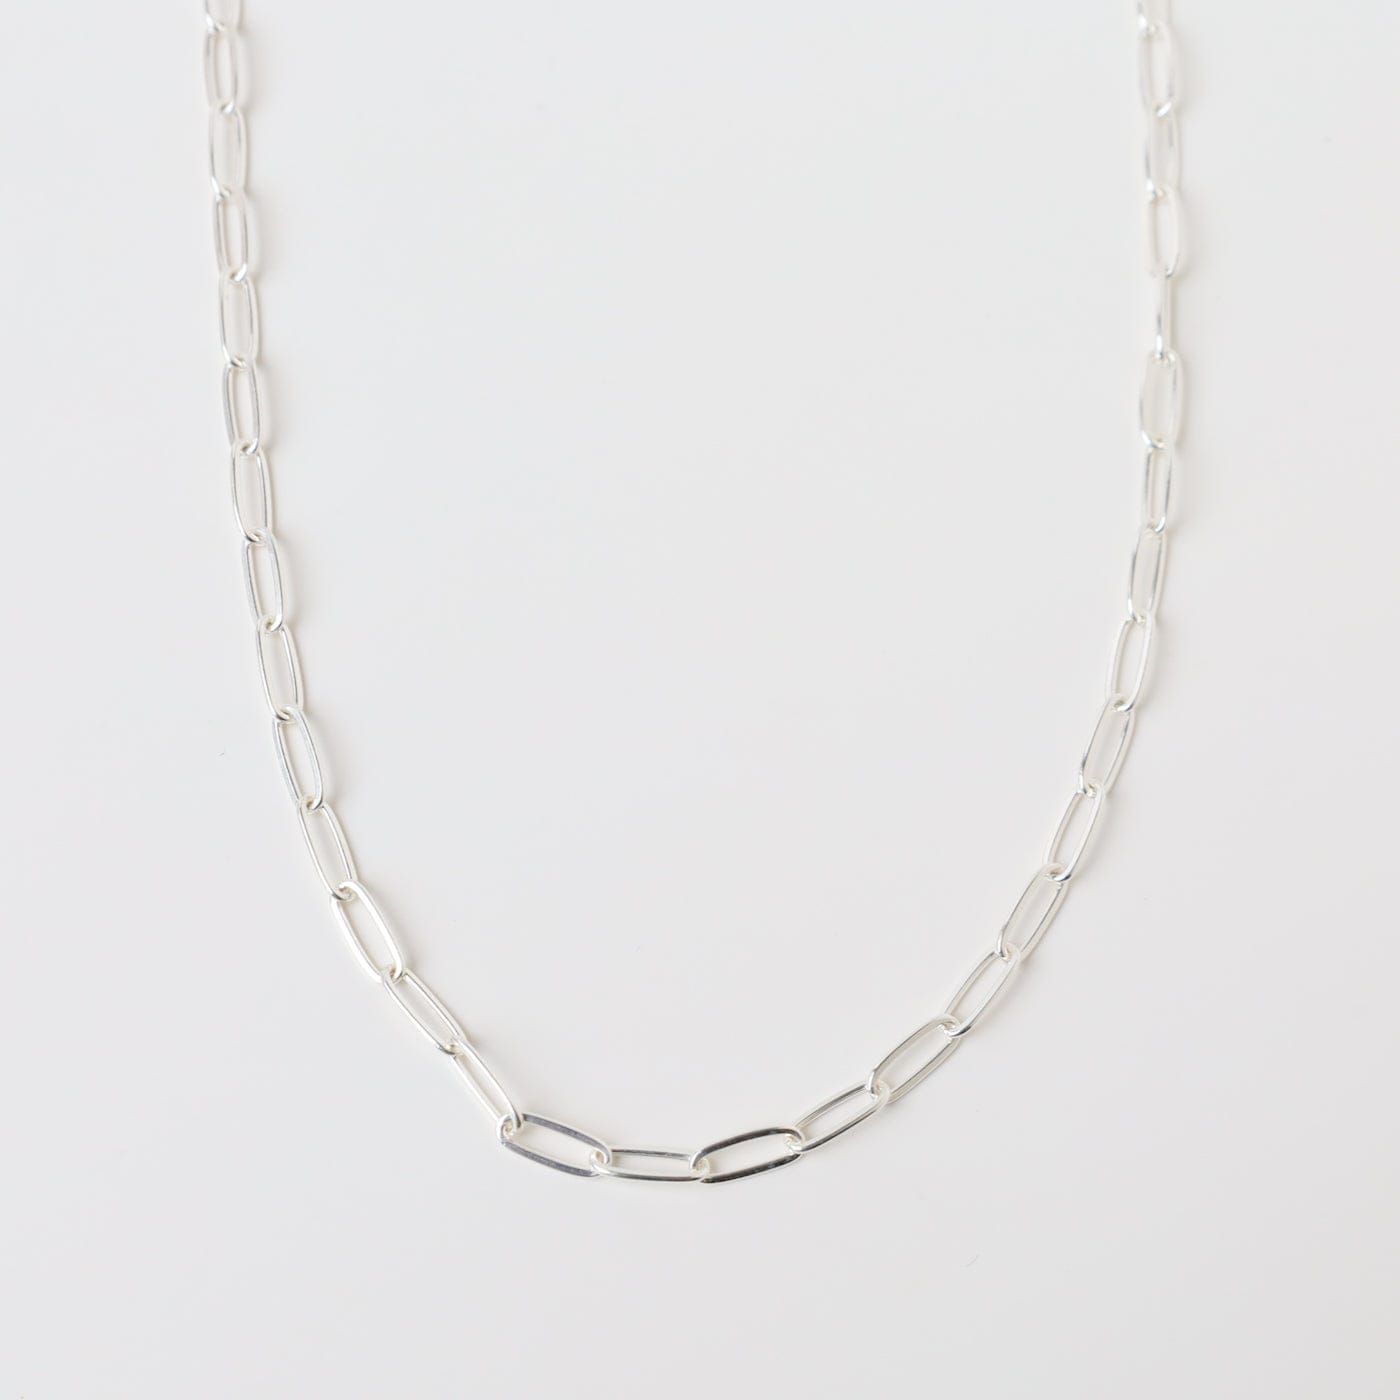 NKL 16" Sterling Silver Flat Drawn Cable Chain